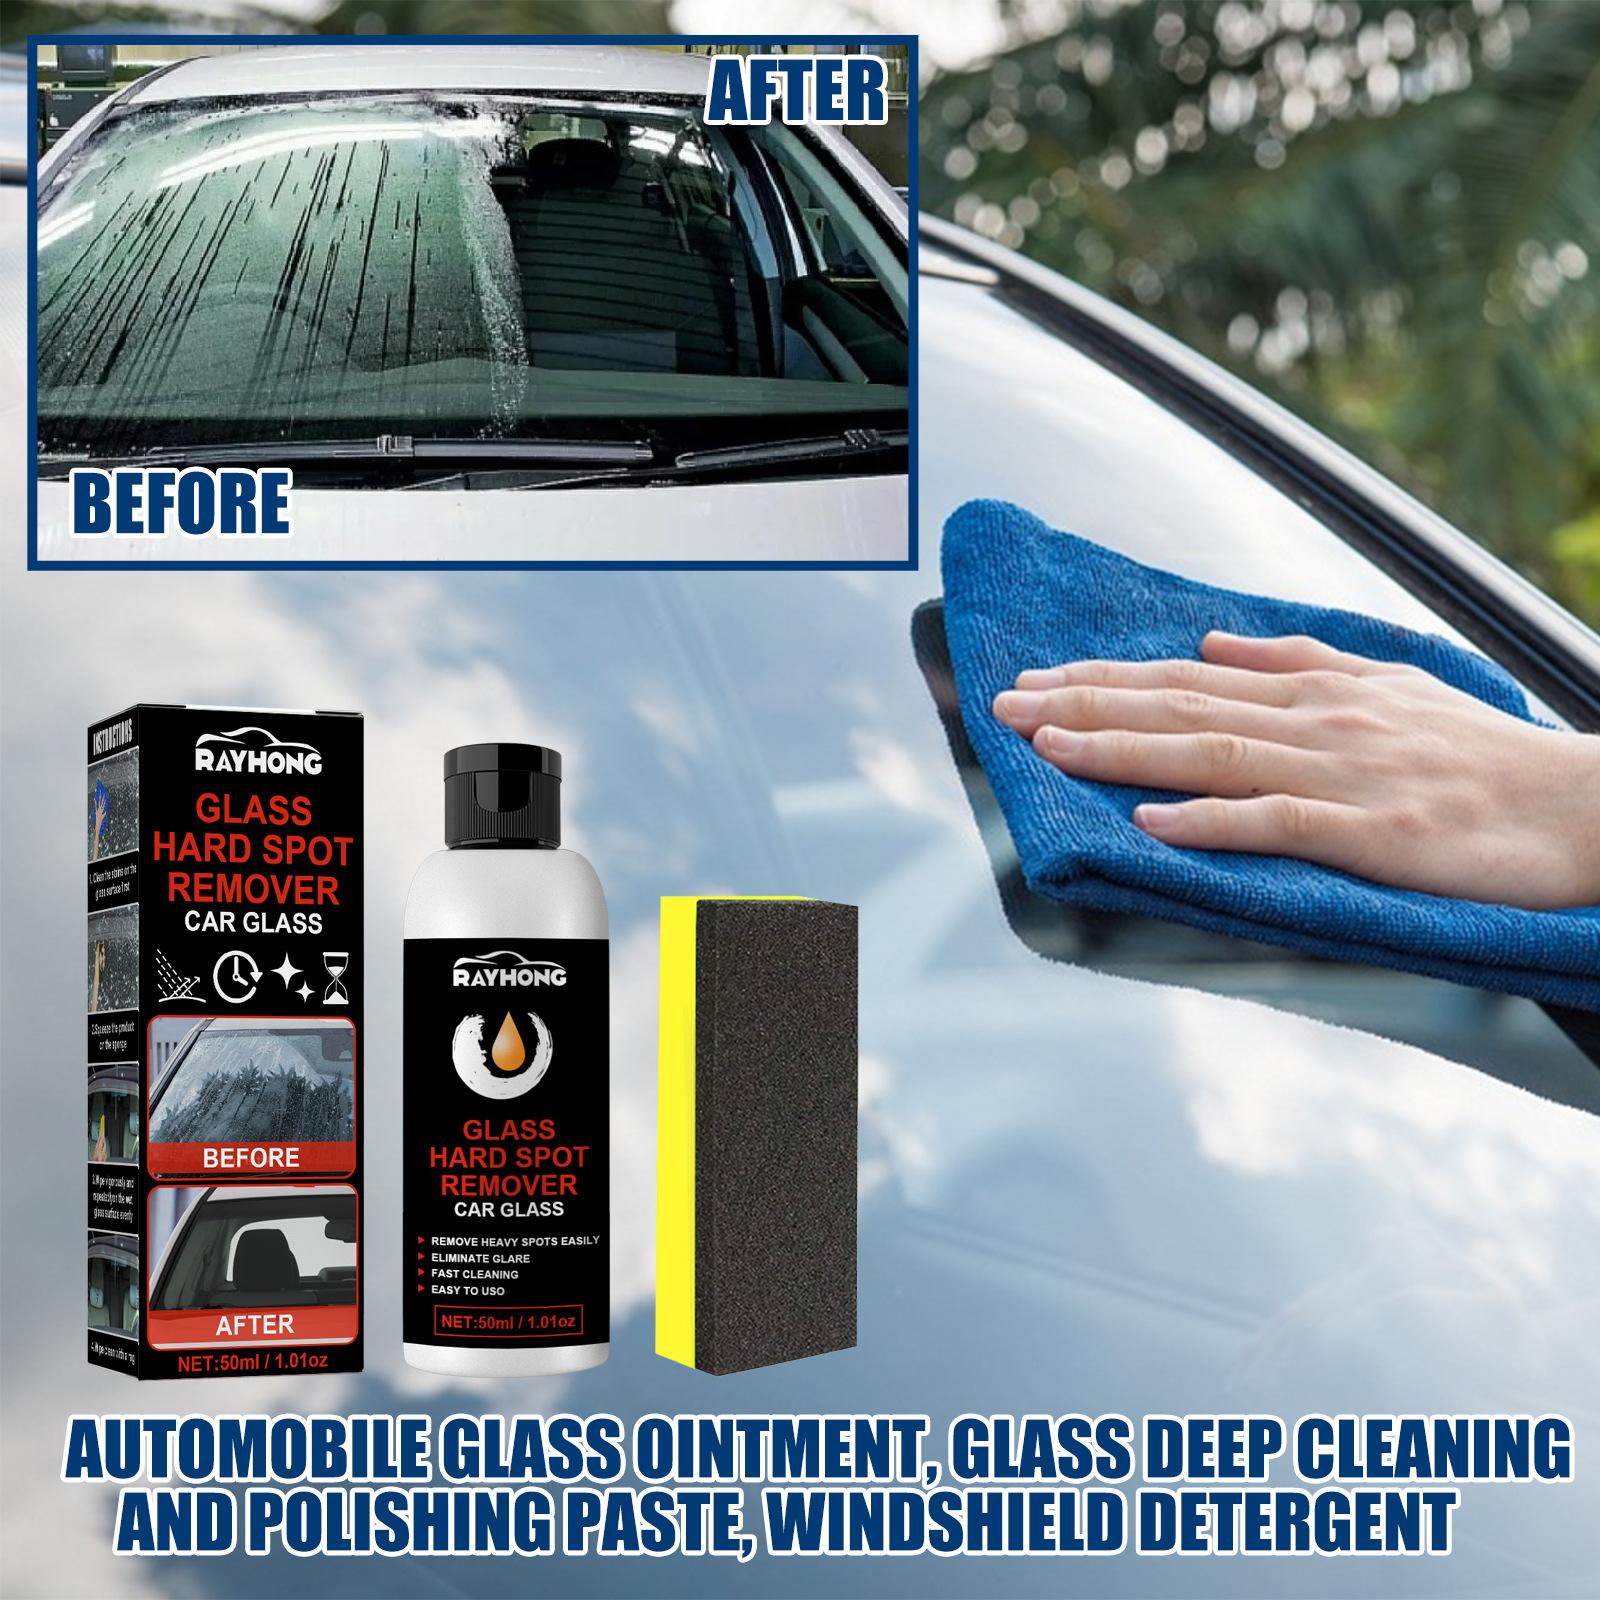 Automobile Glass Deep Cleaning And Polishing Paste, Glass Scratch Repair,  Cleaning, Decontamination, And Polishing Paste